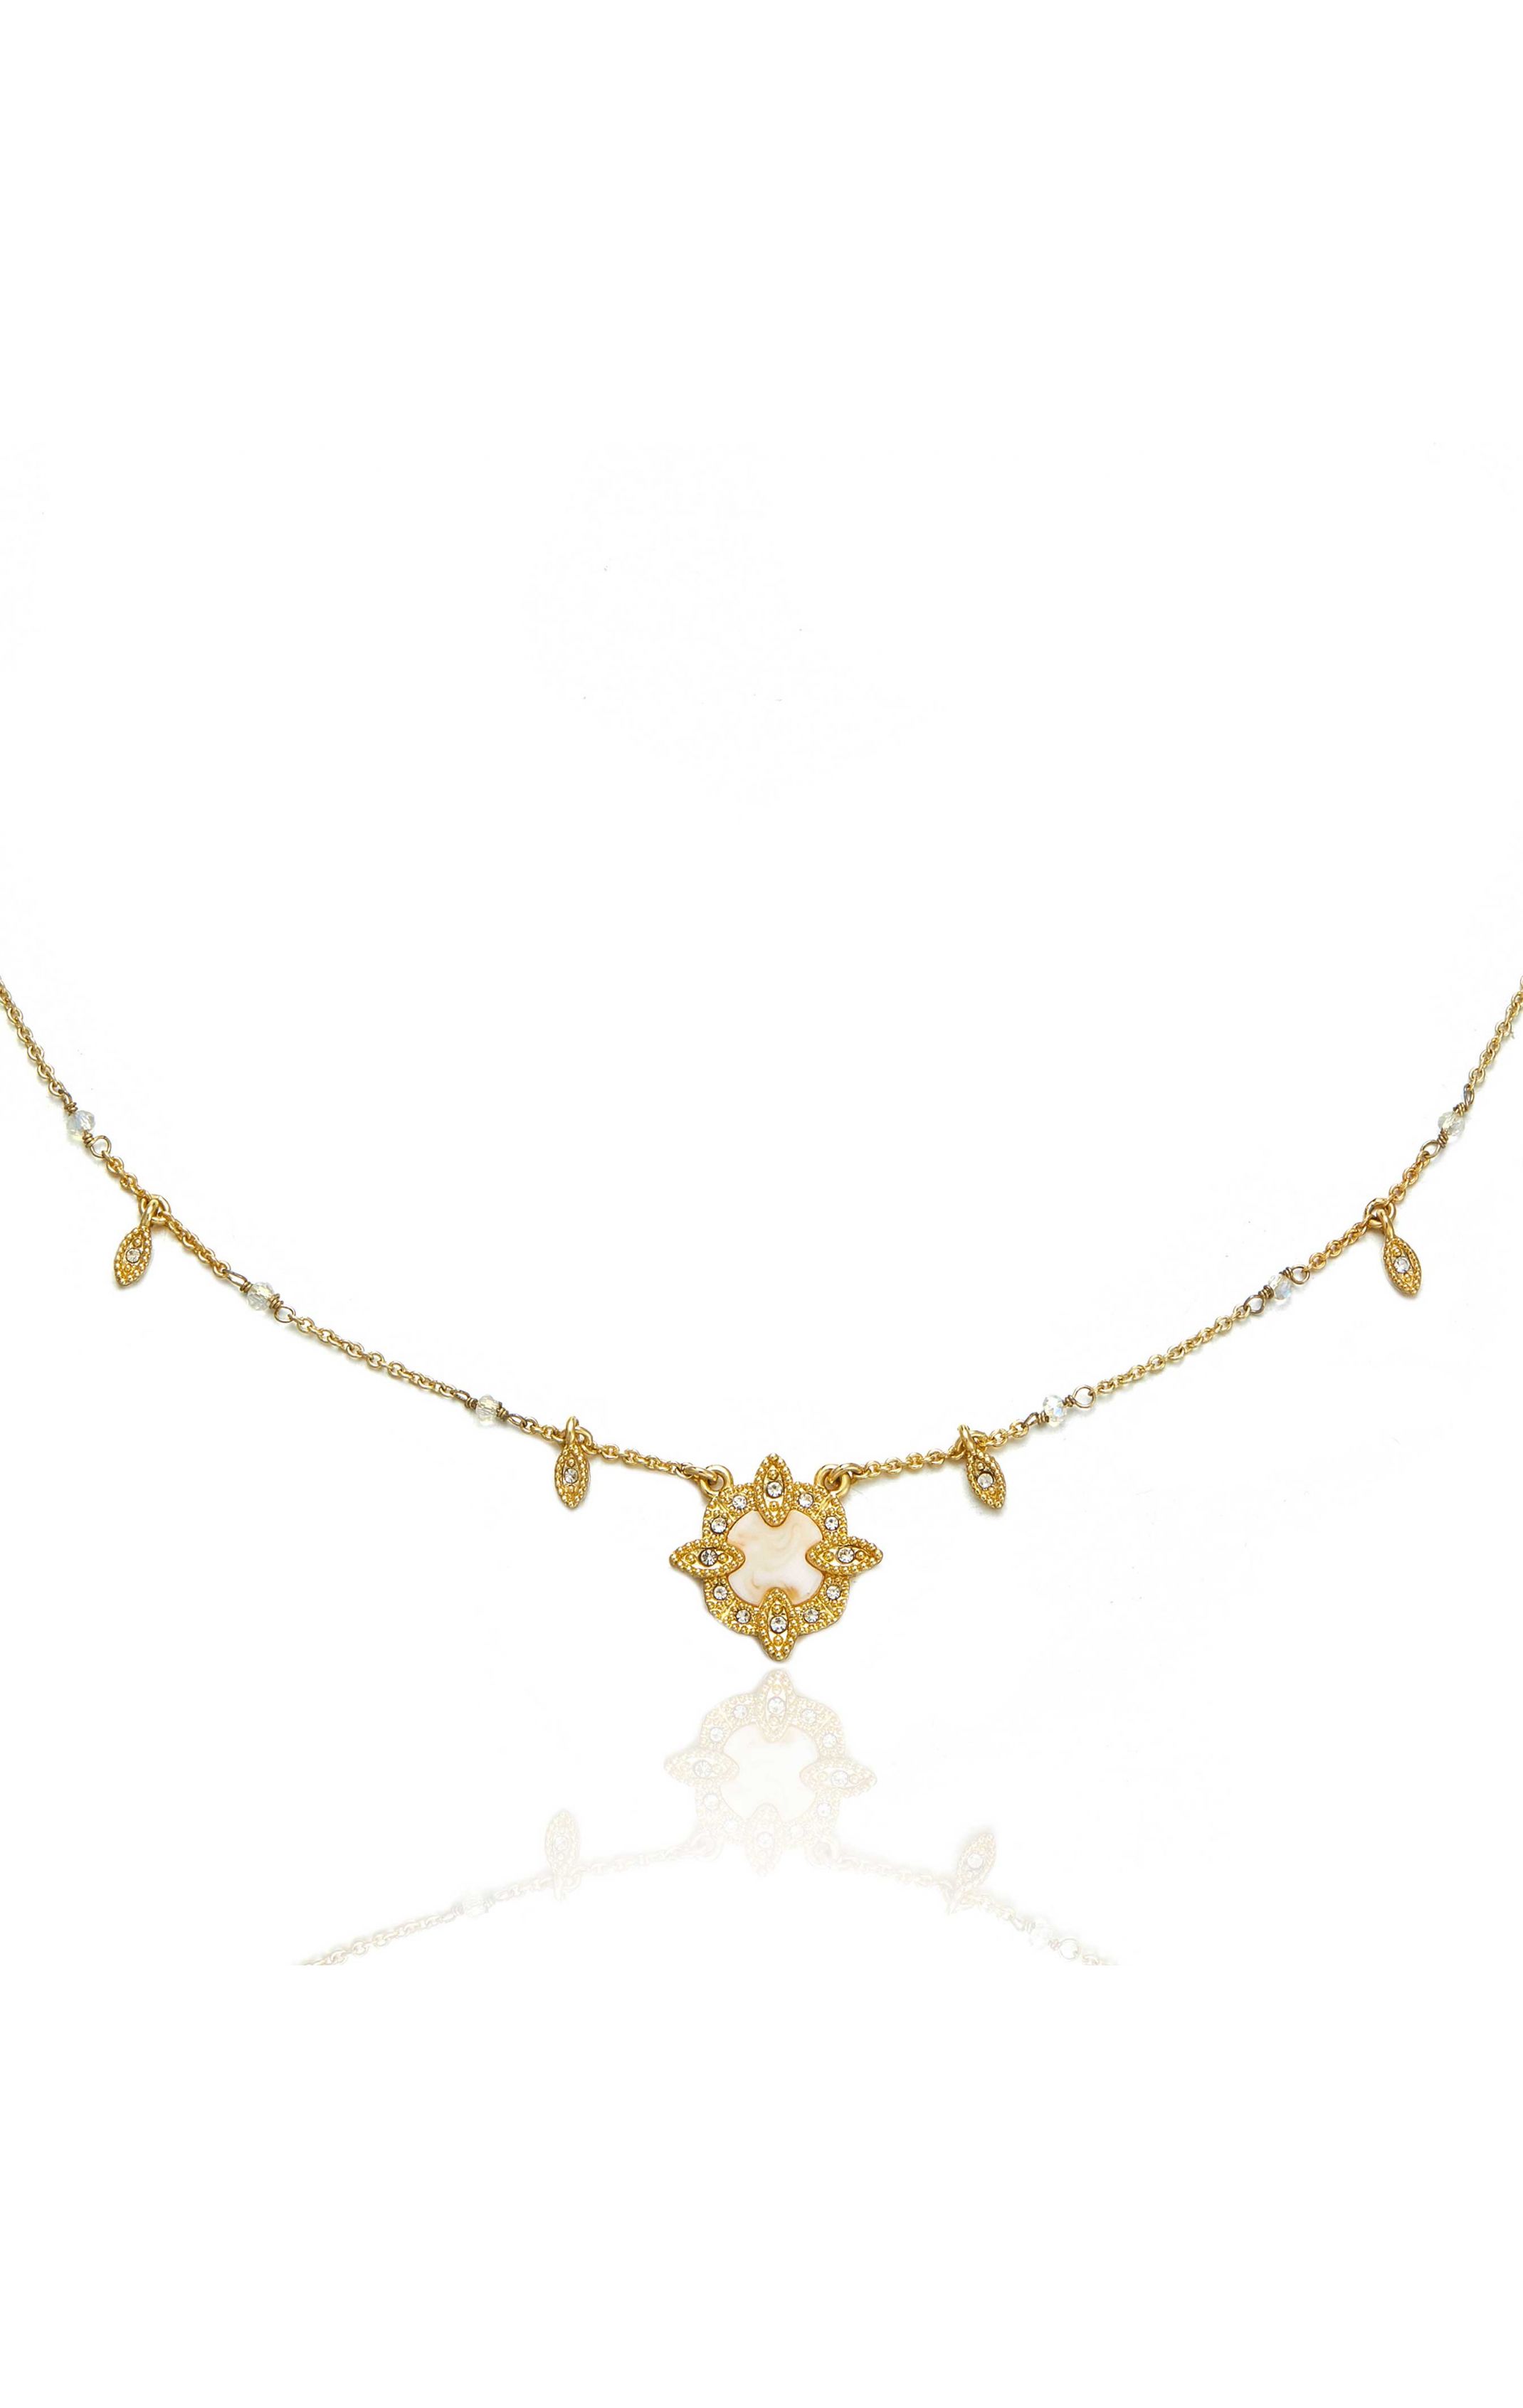 Necklace Missy Gold